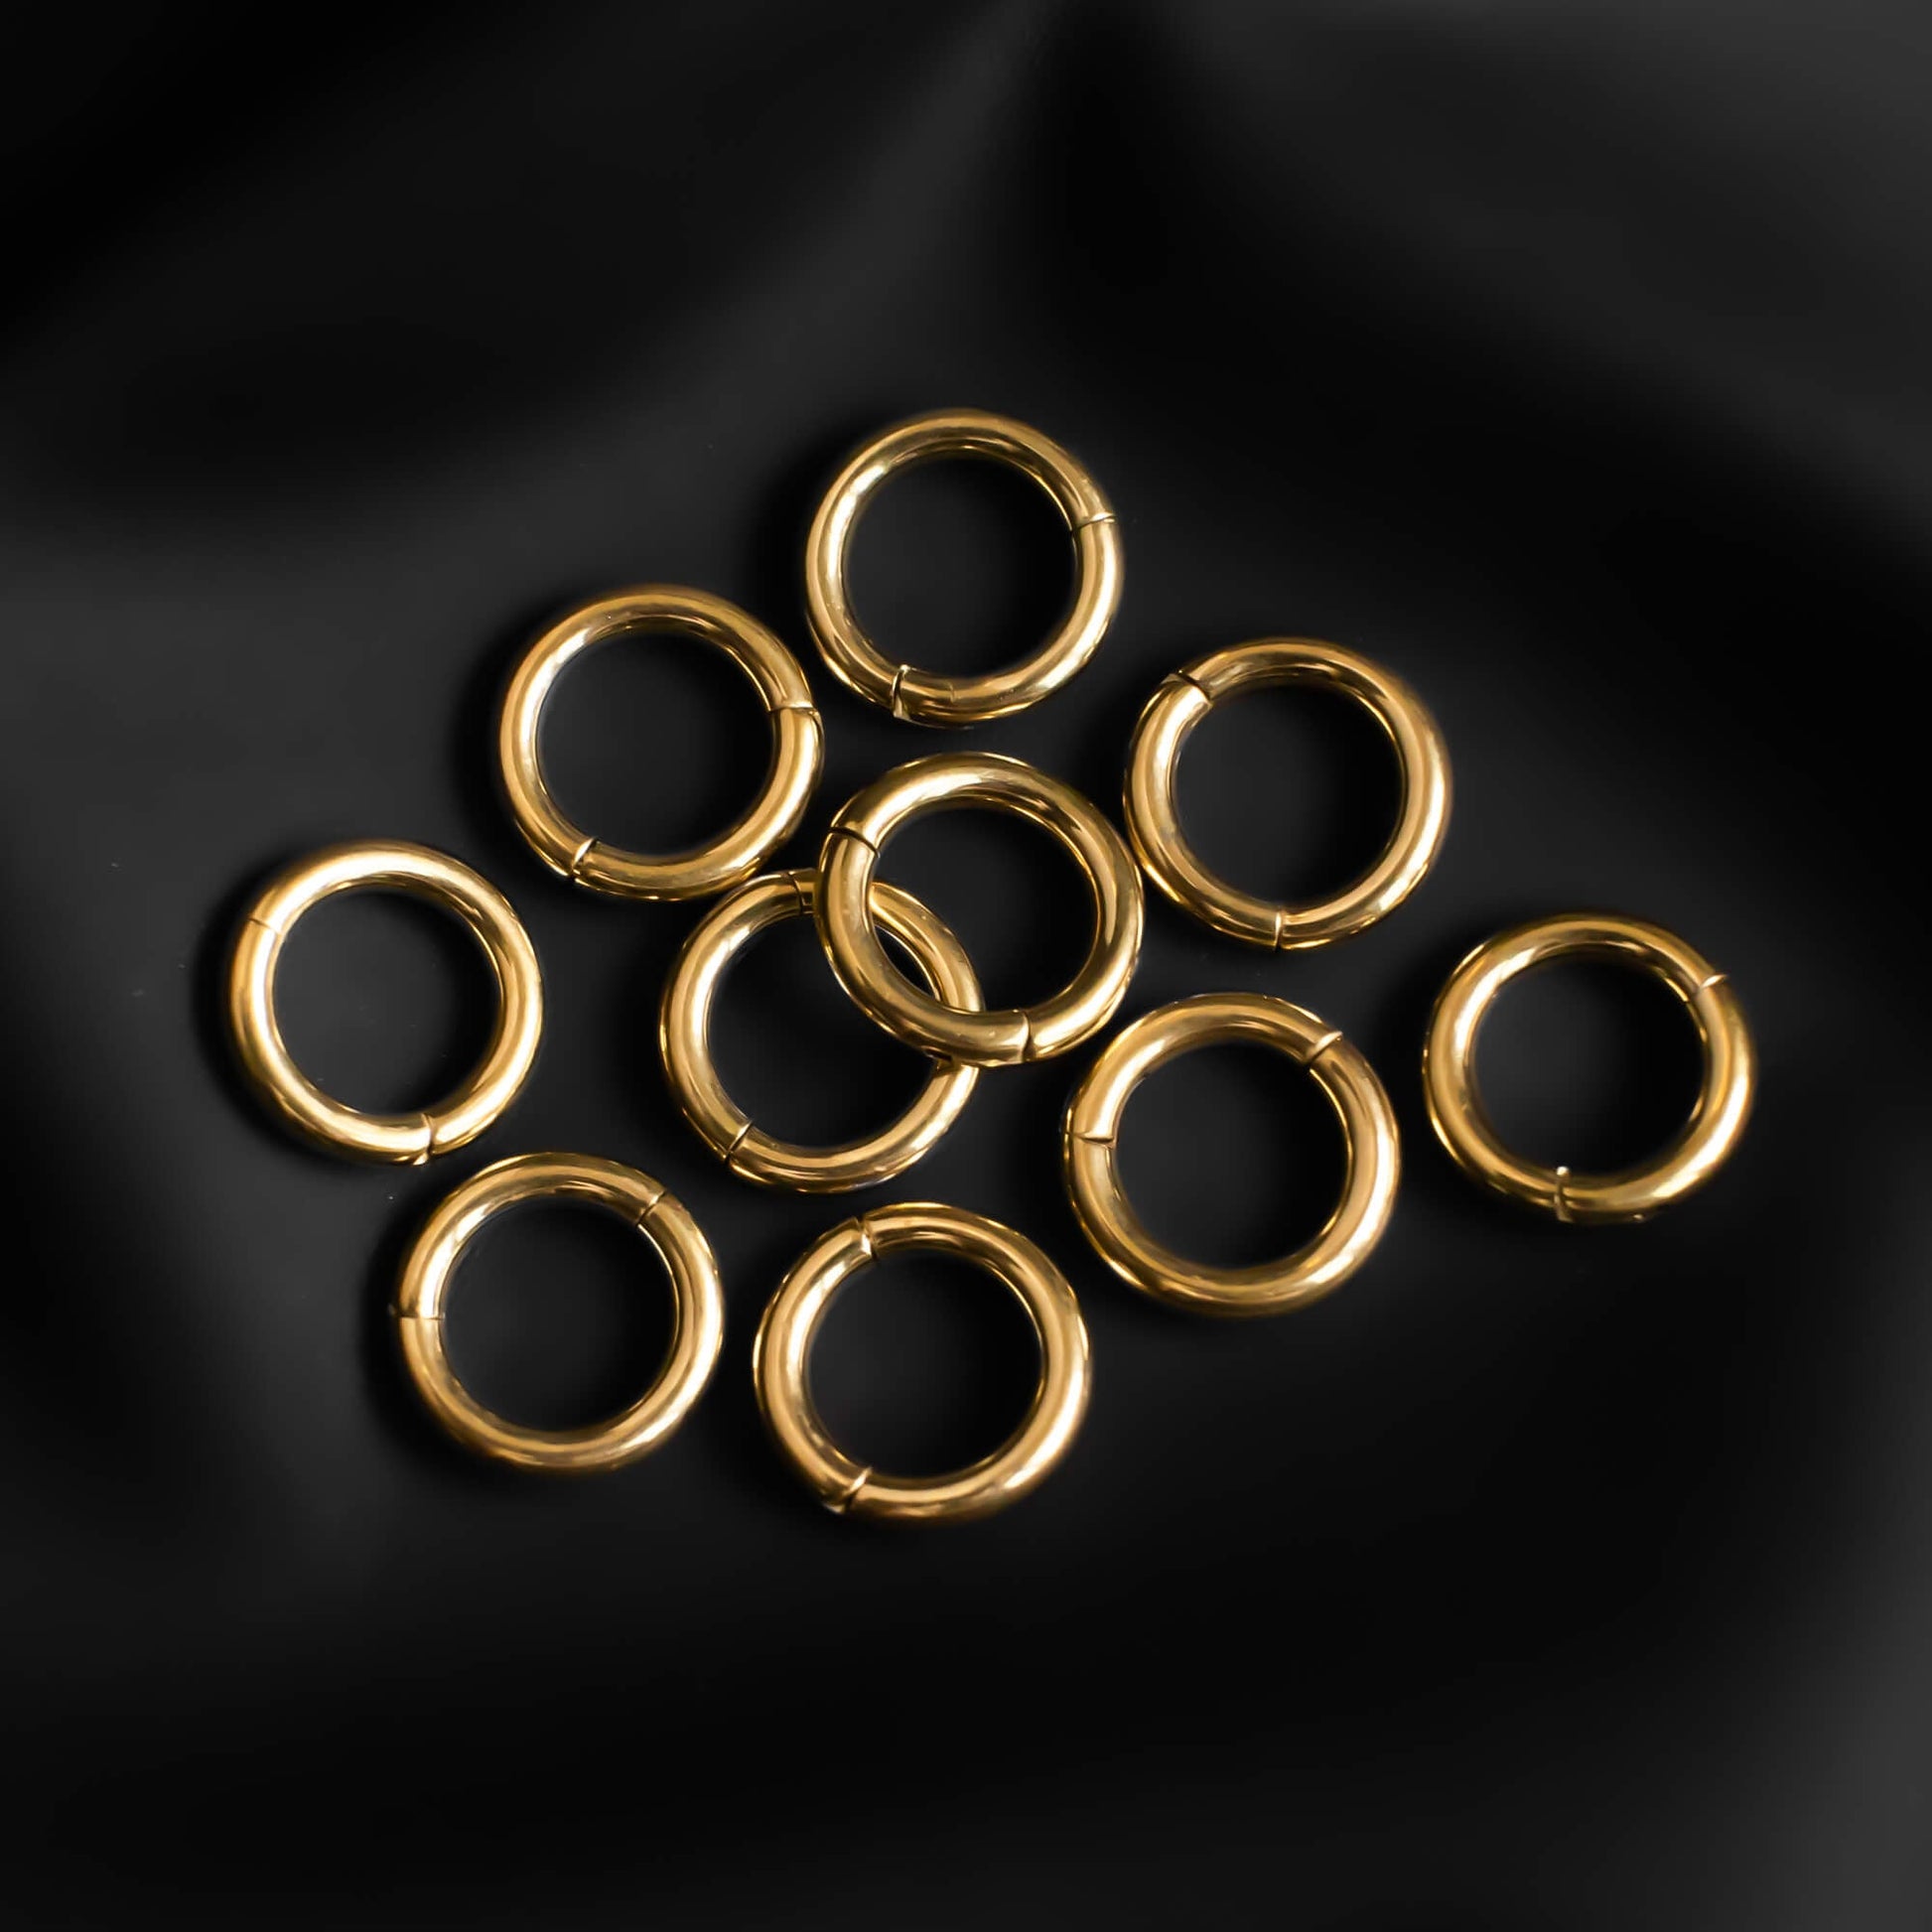 Classic Ring Stack in Steel - Gold 1.2mm (16 Gauge) 6mm, Stretched Ear Jewelry